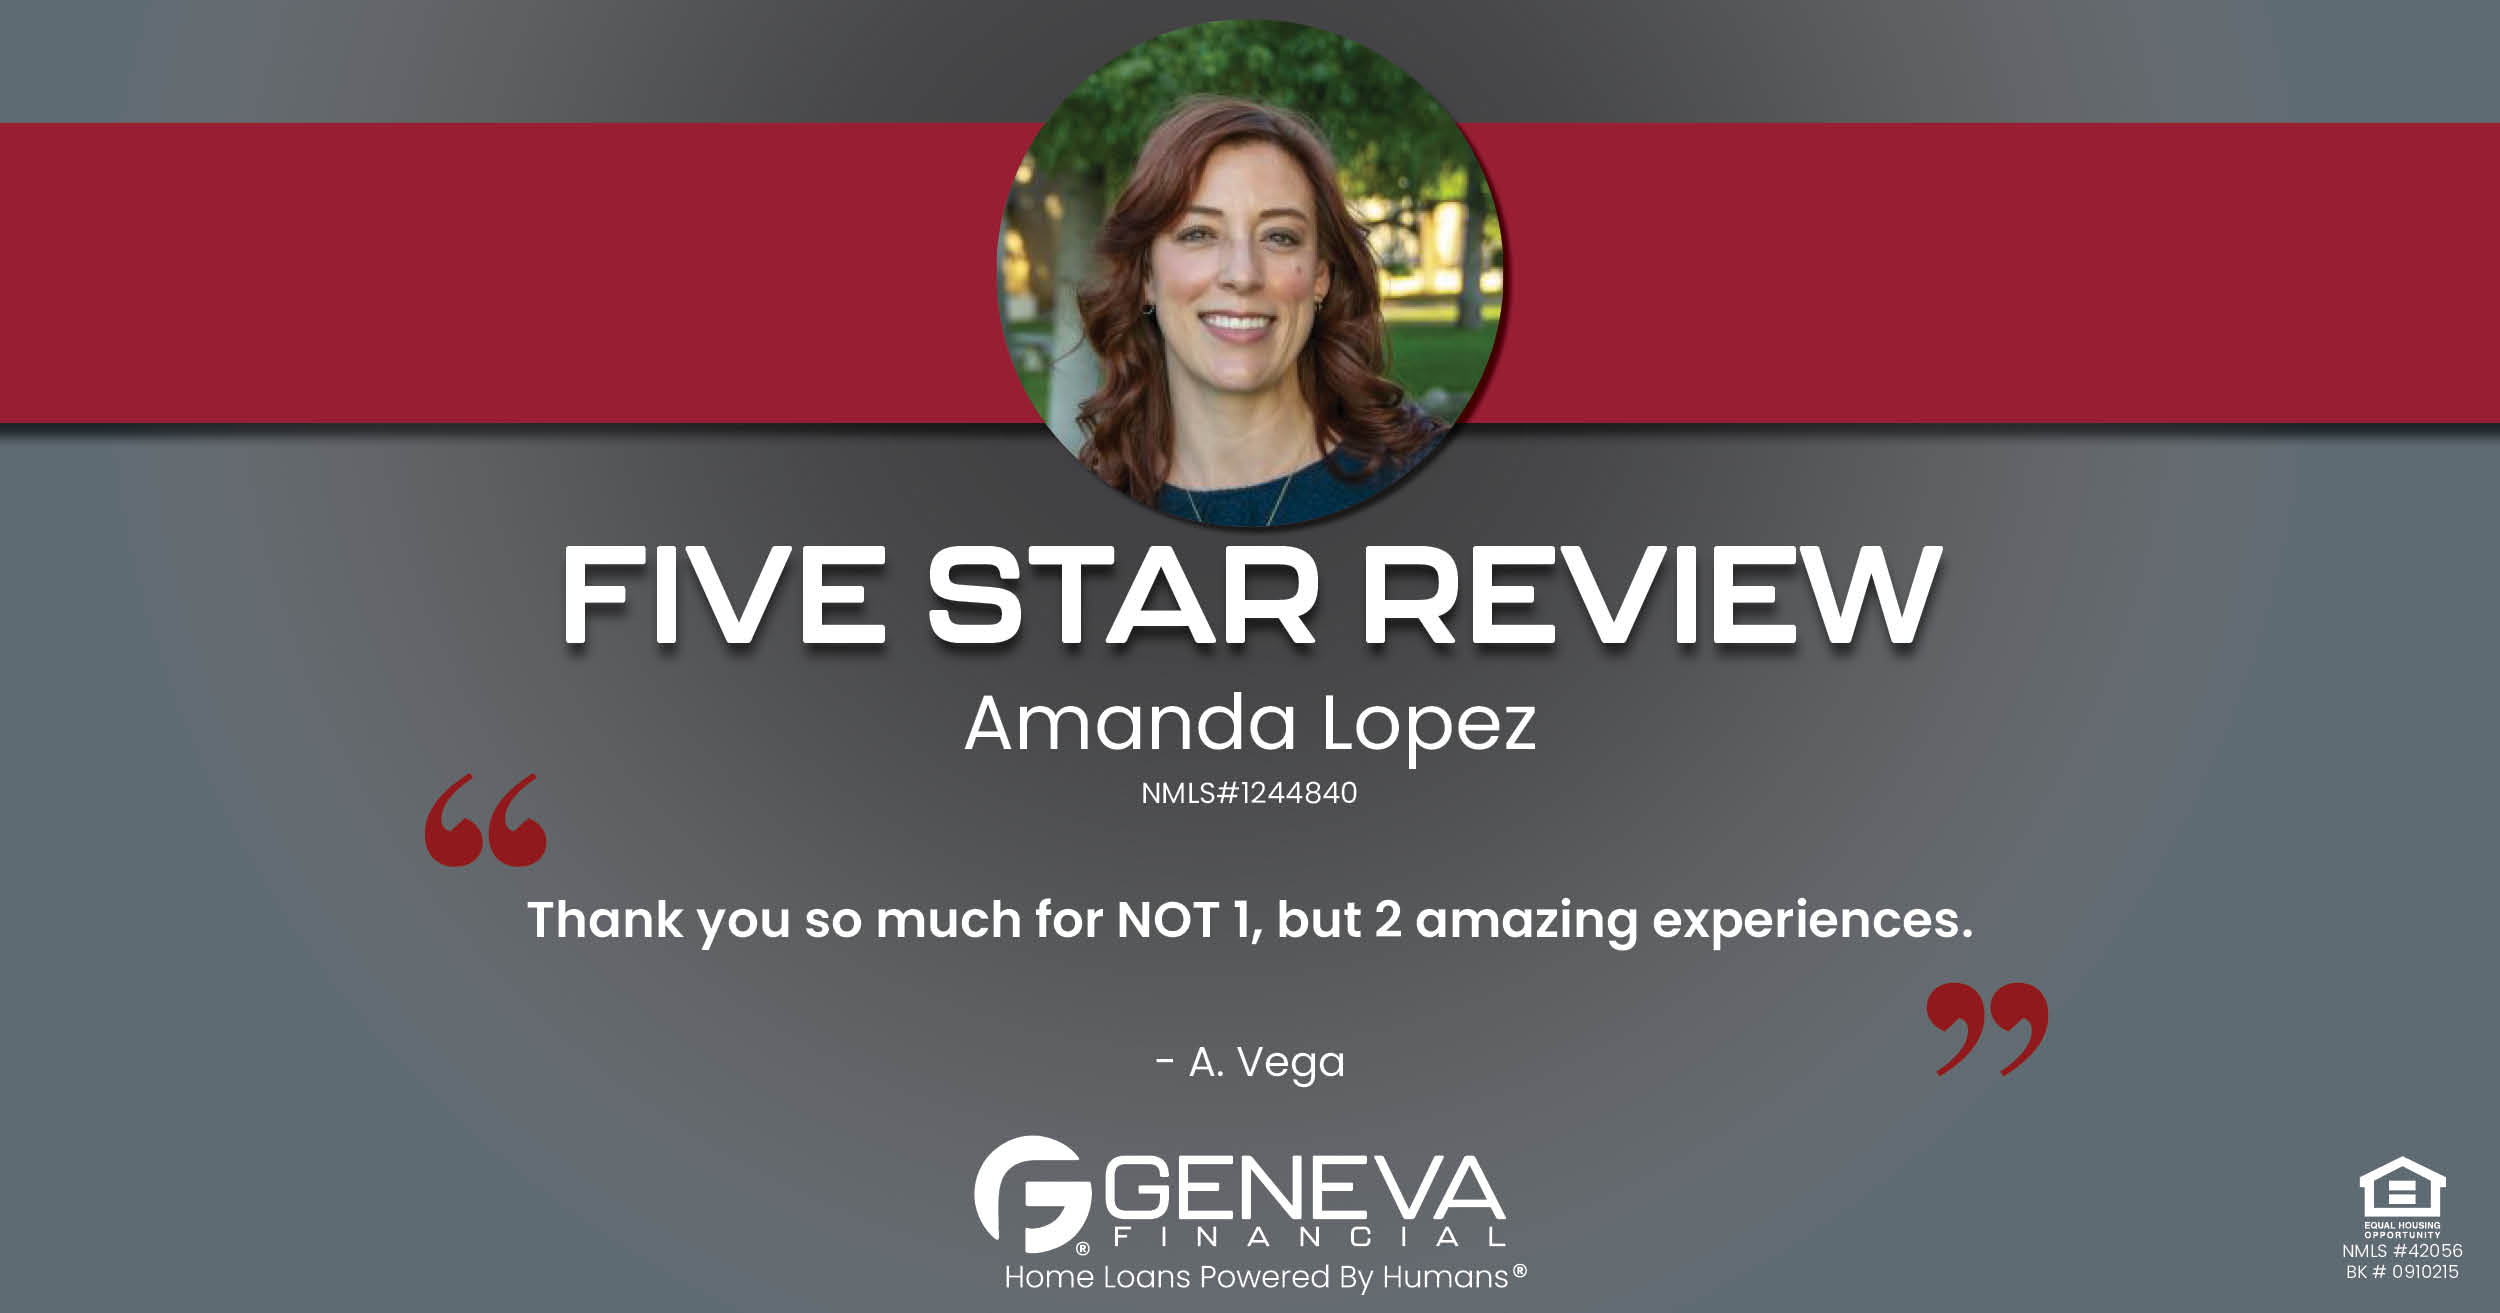 5 Star Review for Amanda Lopez, Licensed Mortgage Loan Officer with Geneva Financial, Phoenix, Arizona – Home Loans Powered by Humans®.